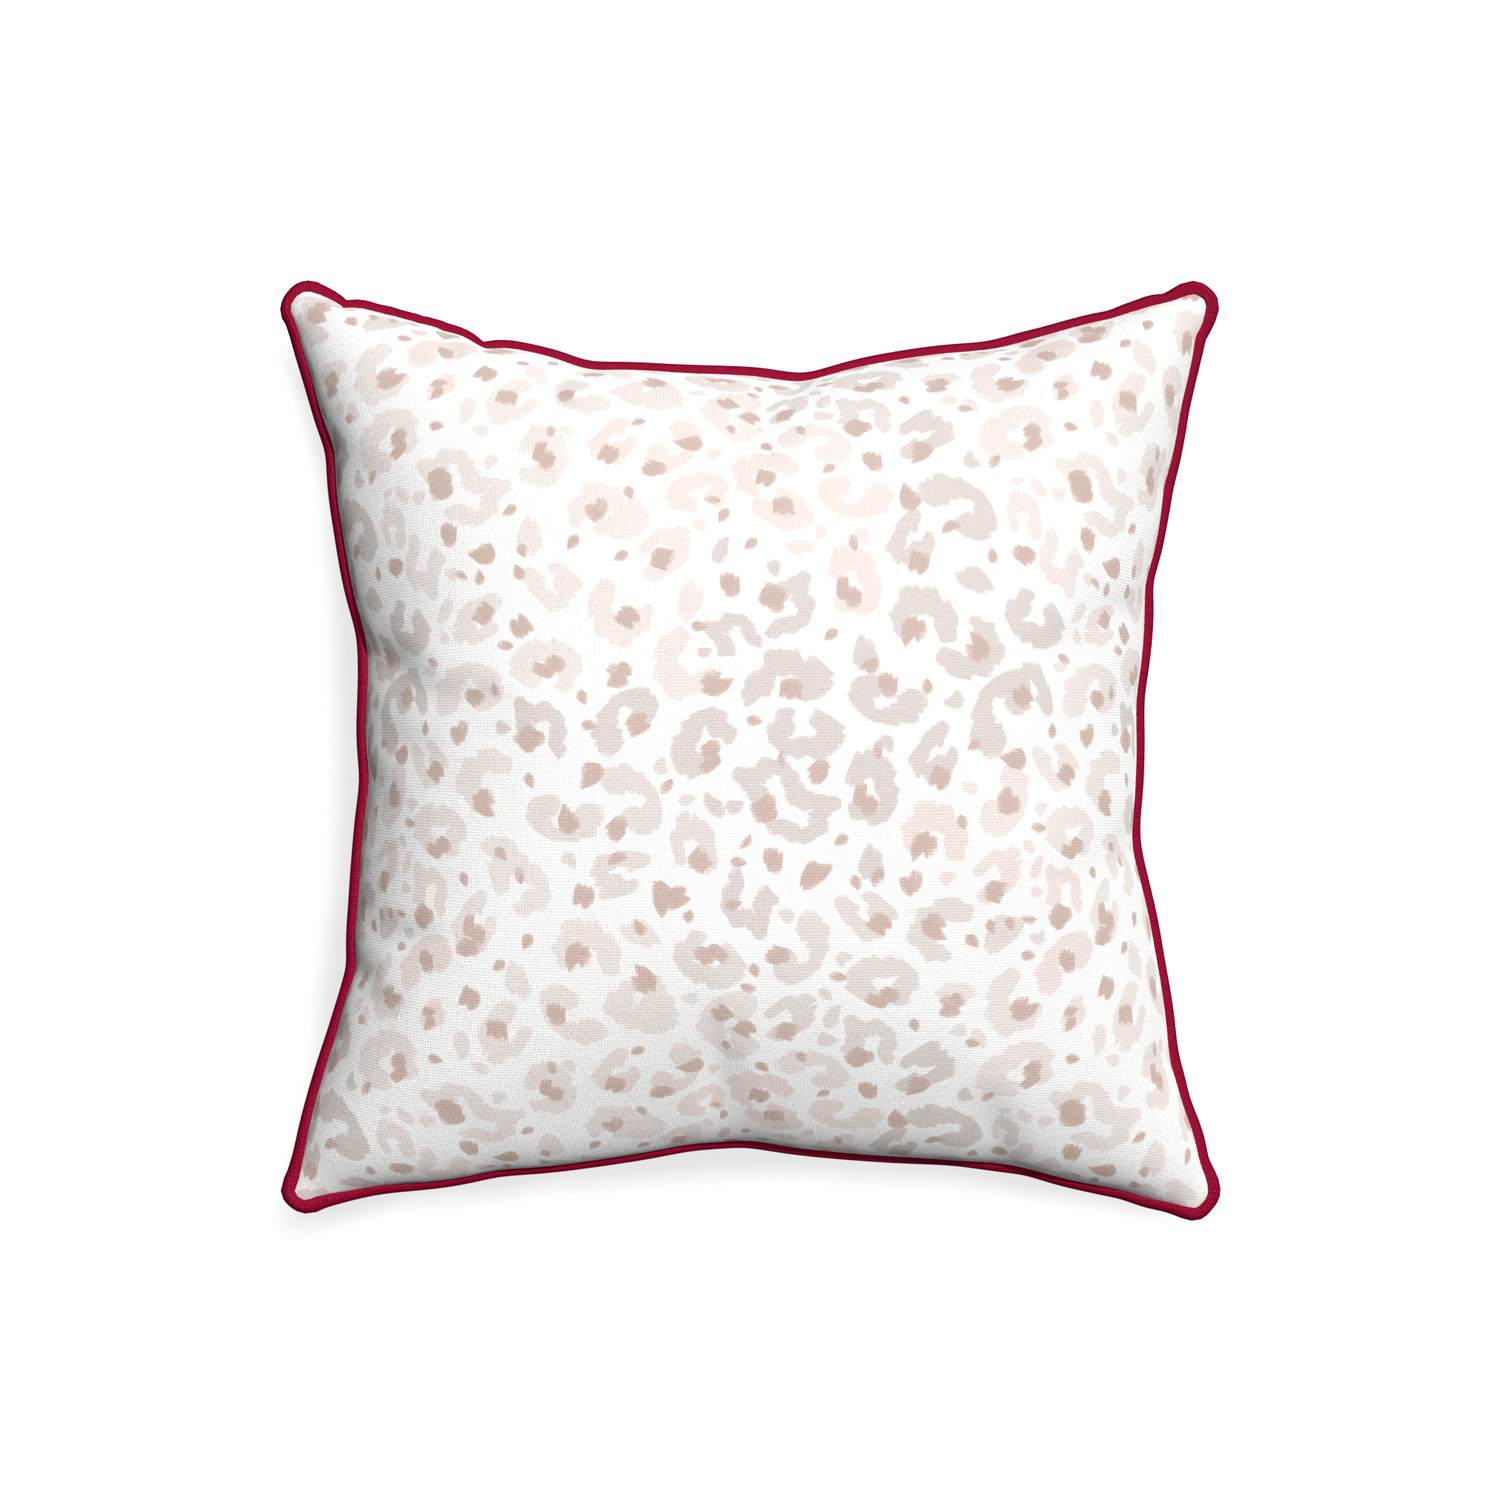 20-square rosie custom beige animal printpillow with raspberry piping on white background